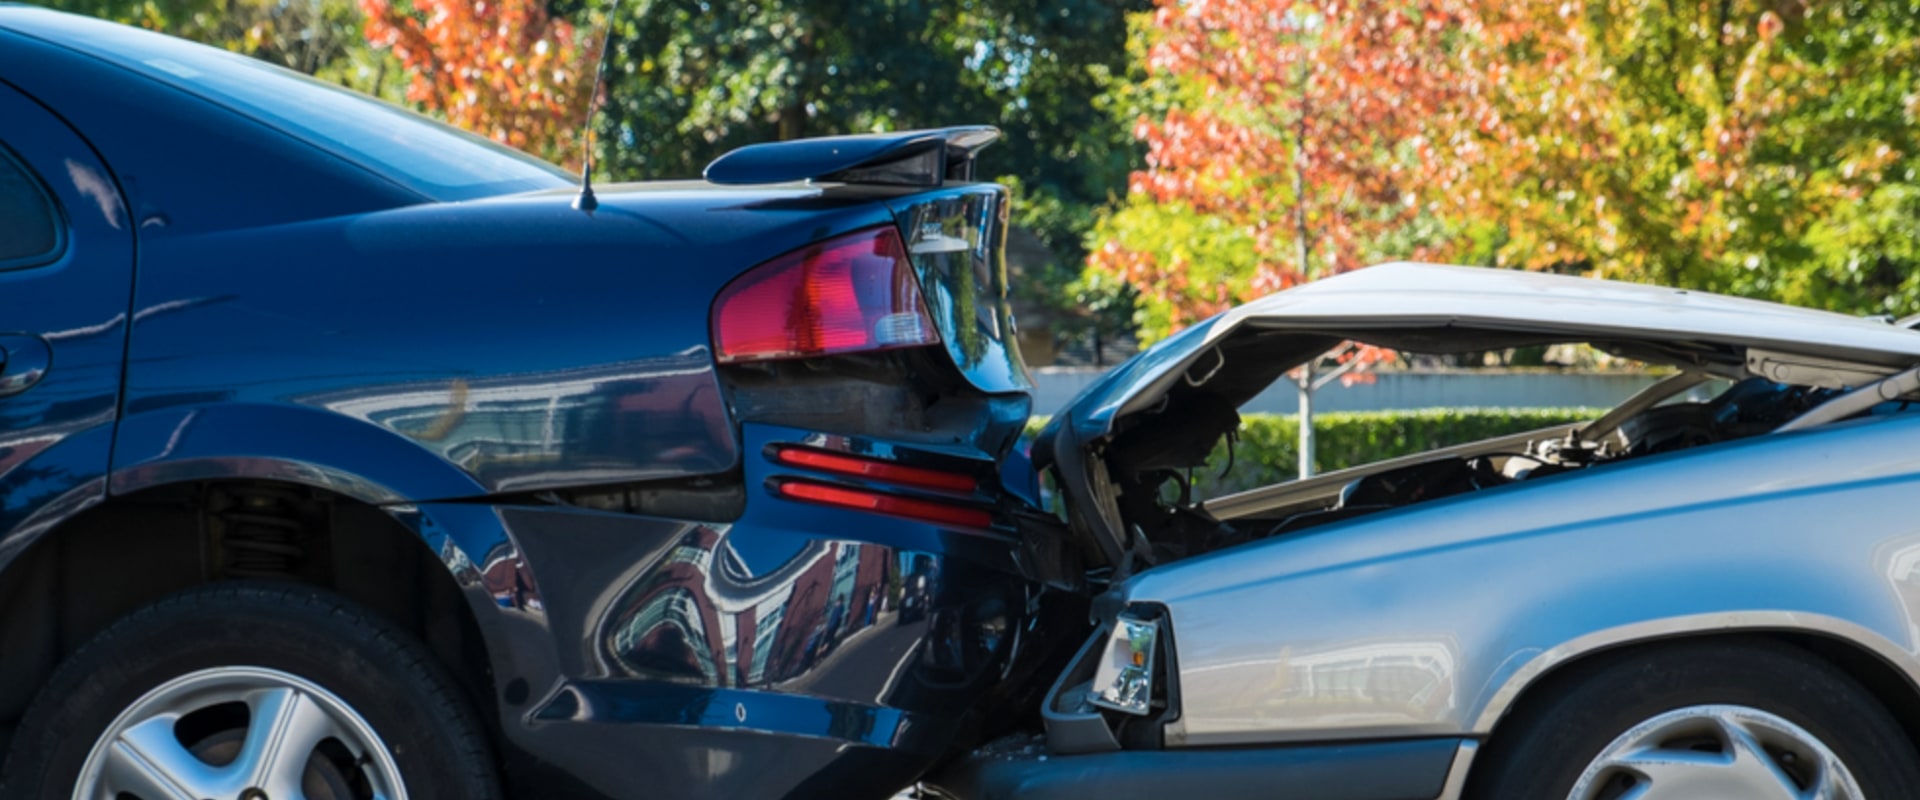 How long does it take to recover from an emergency auto accident injury chiropractic treatment?